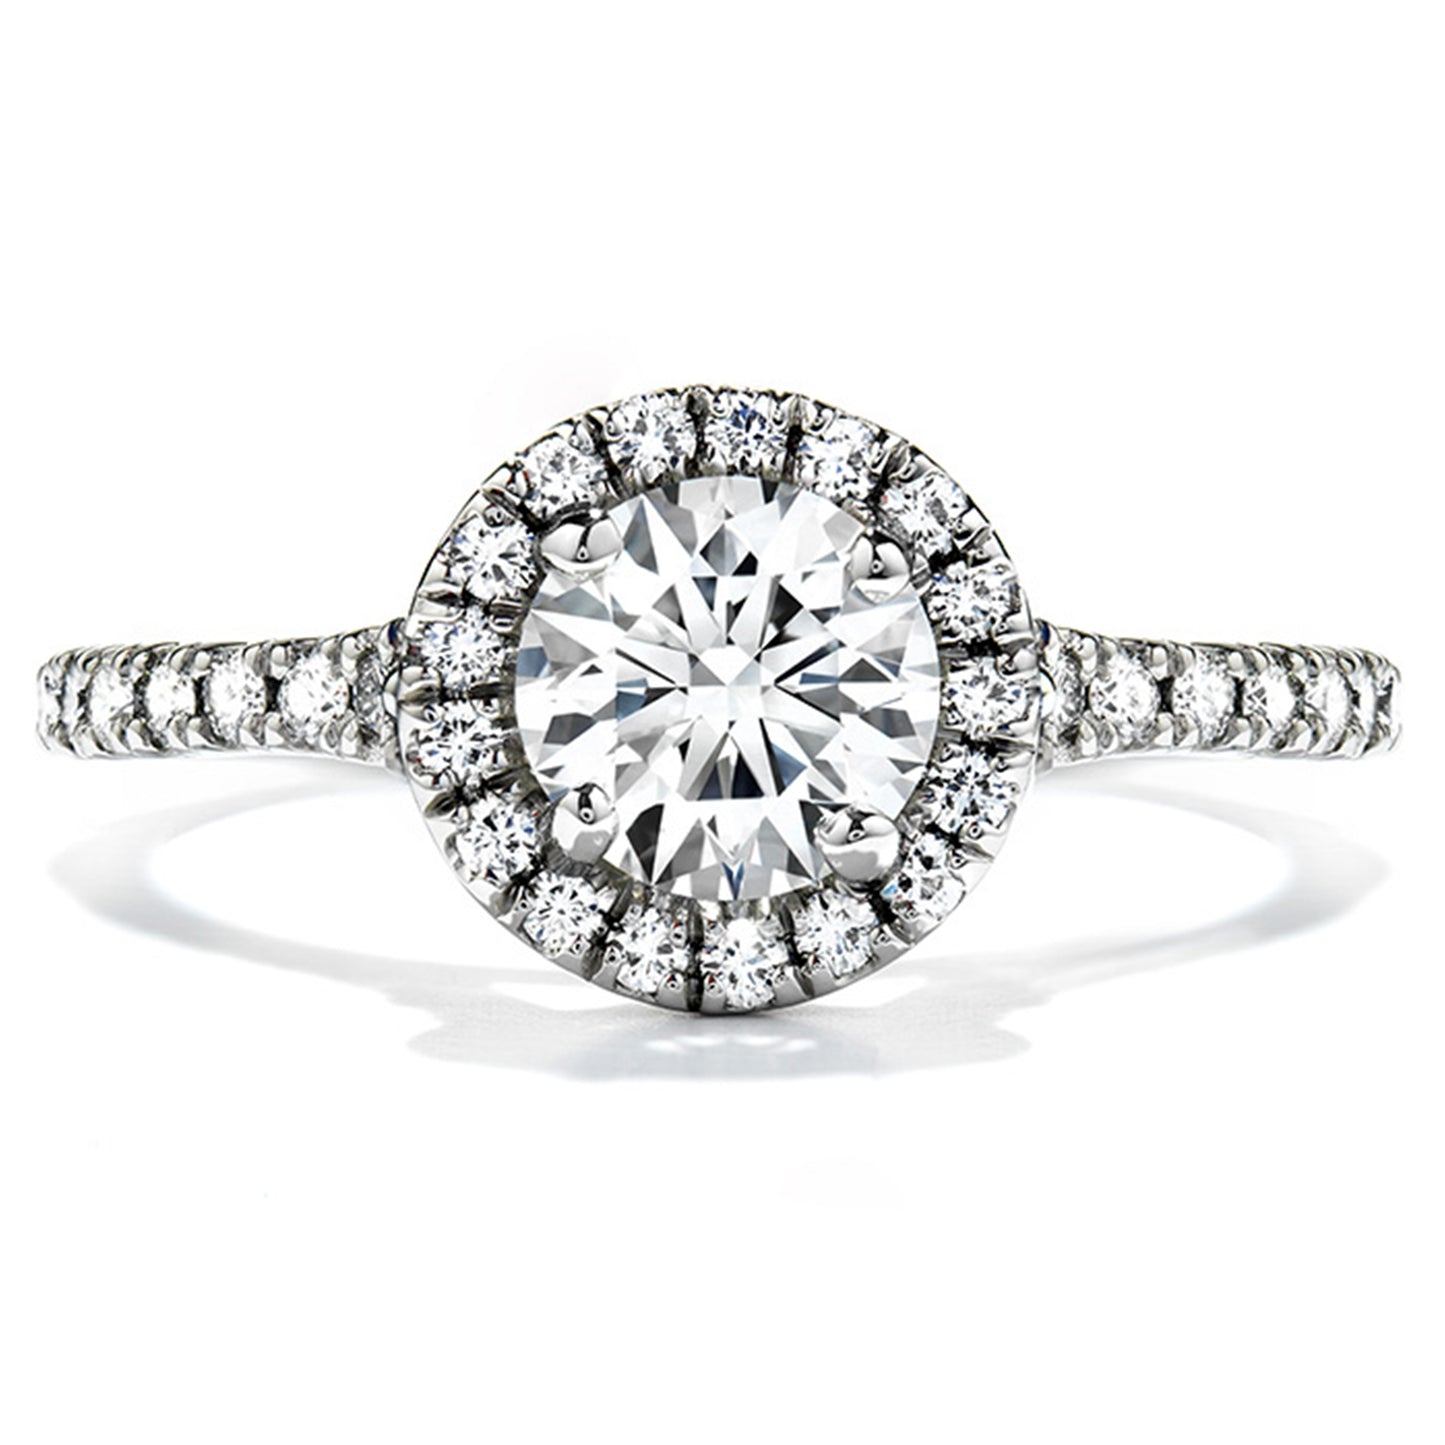 TRANSCEND SINGLE HALO SOLITAIRE ENGAGEMENT RING UU499